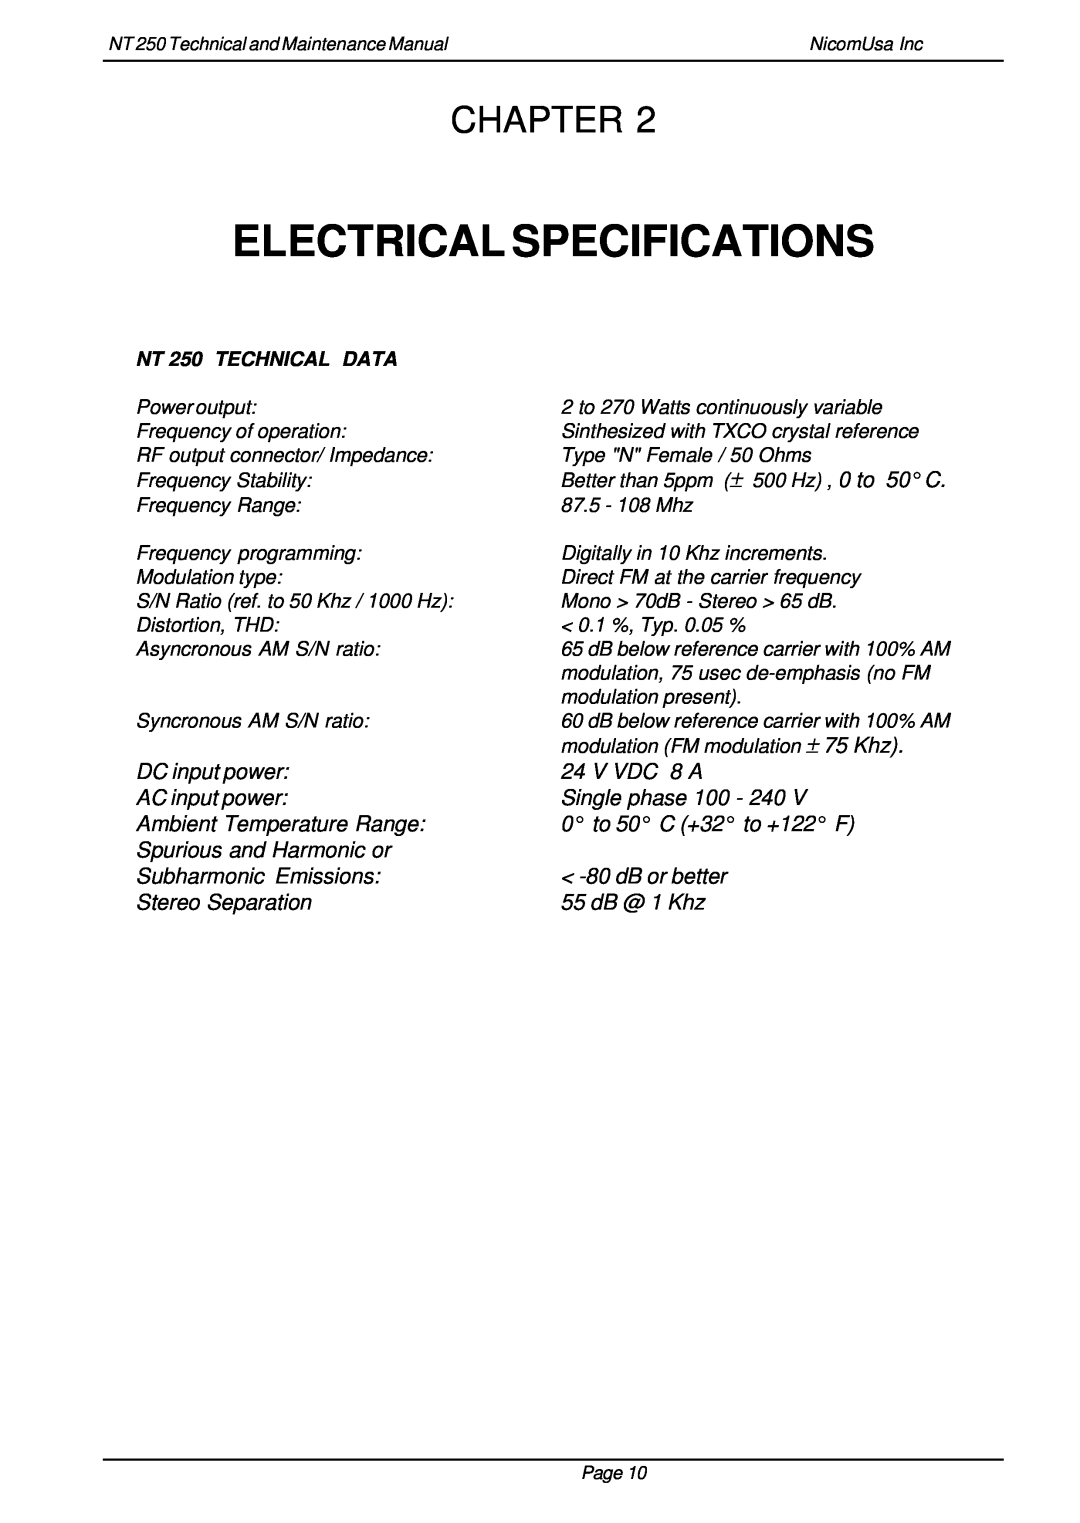 Genius NT 250 specifications Electrical Specifications, Chapter 